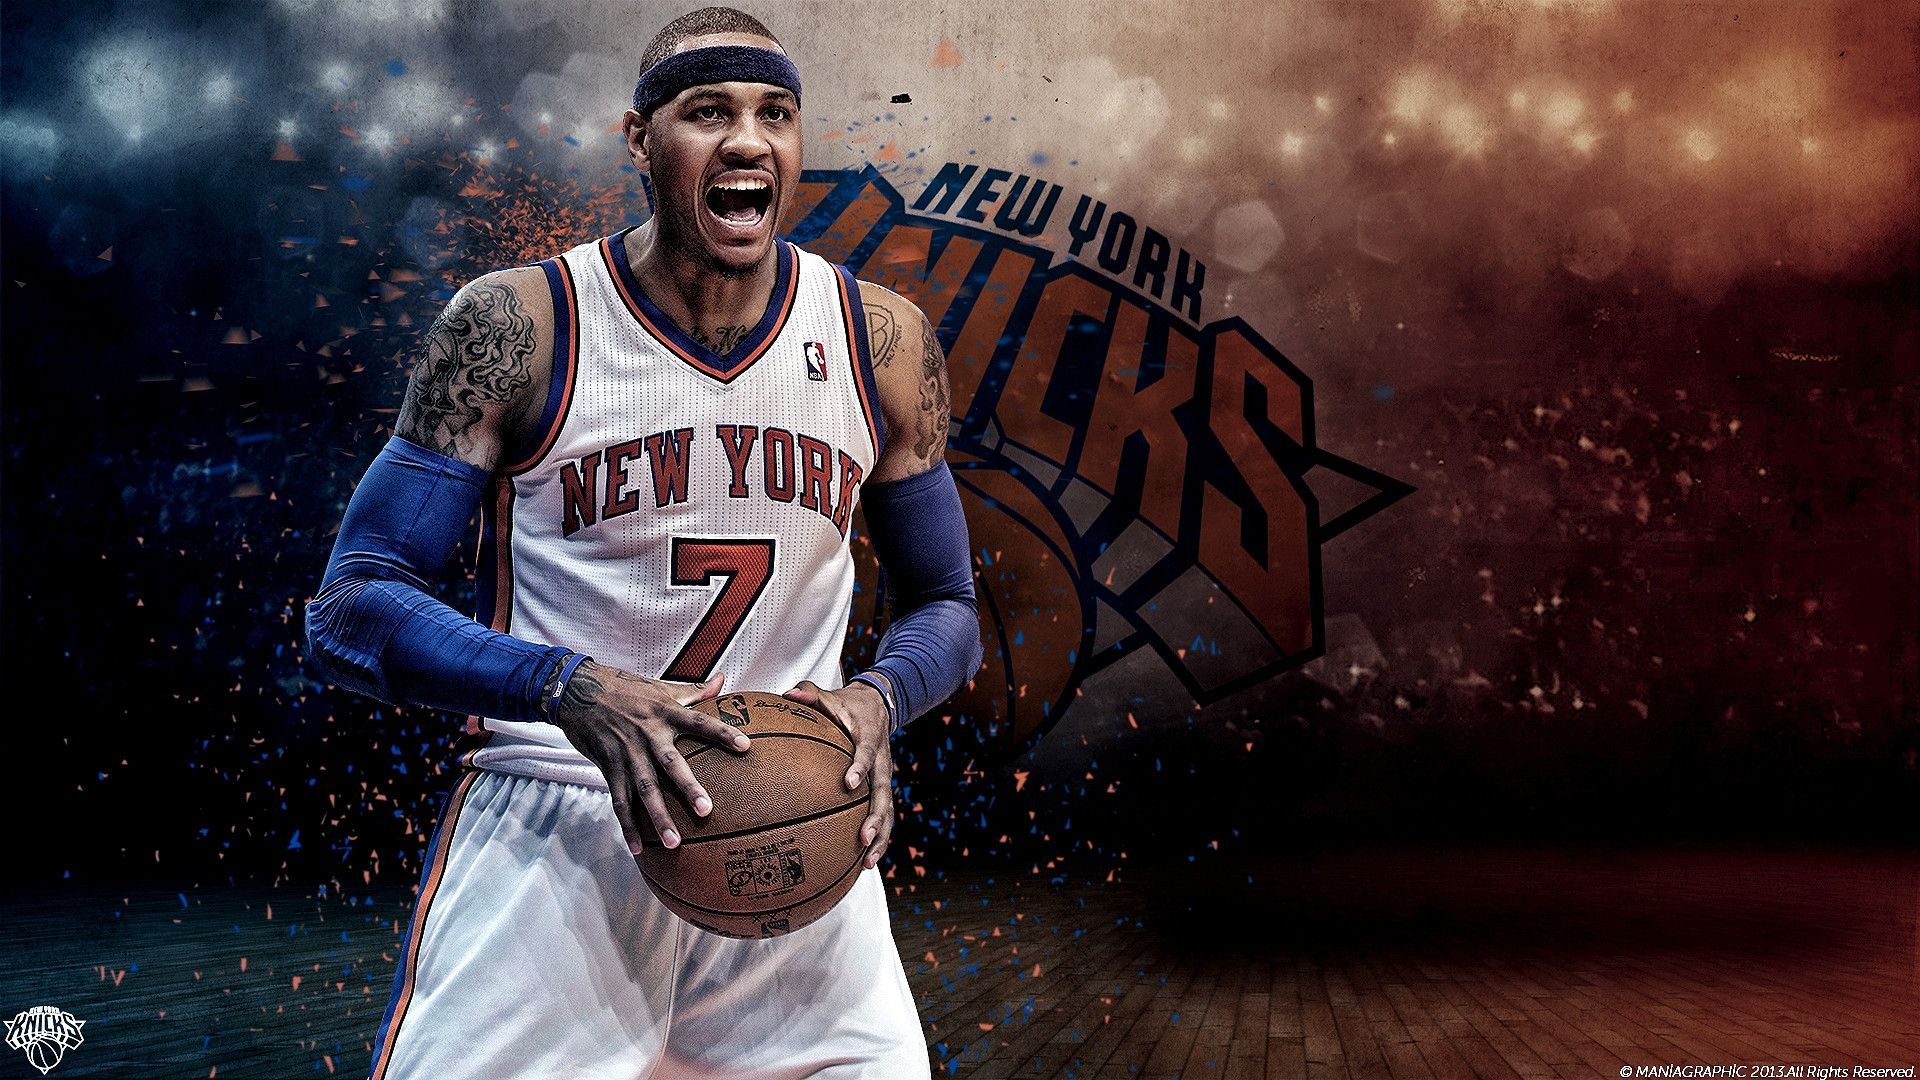 Wallpaper Basketball, New York, NBA, Knicks, Player, Carmelo Anthony, Carmelo  Anthony images for desktop, section спорт - download